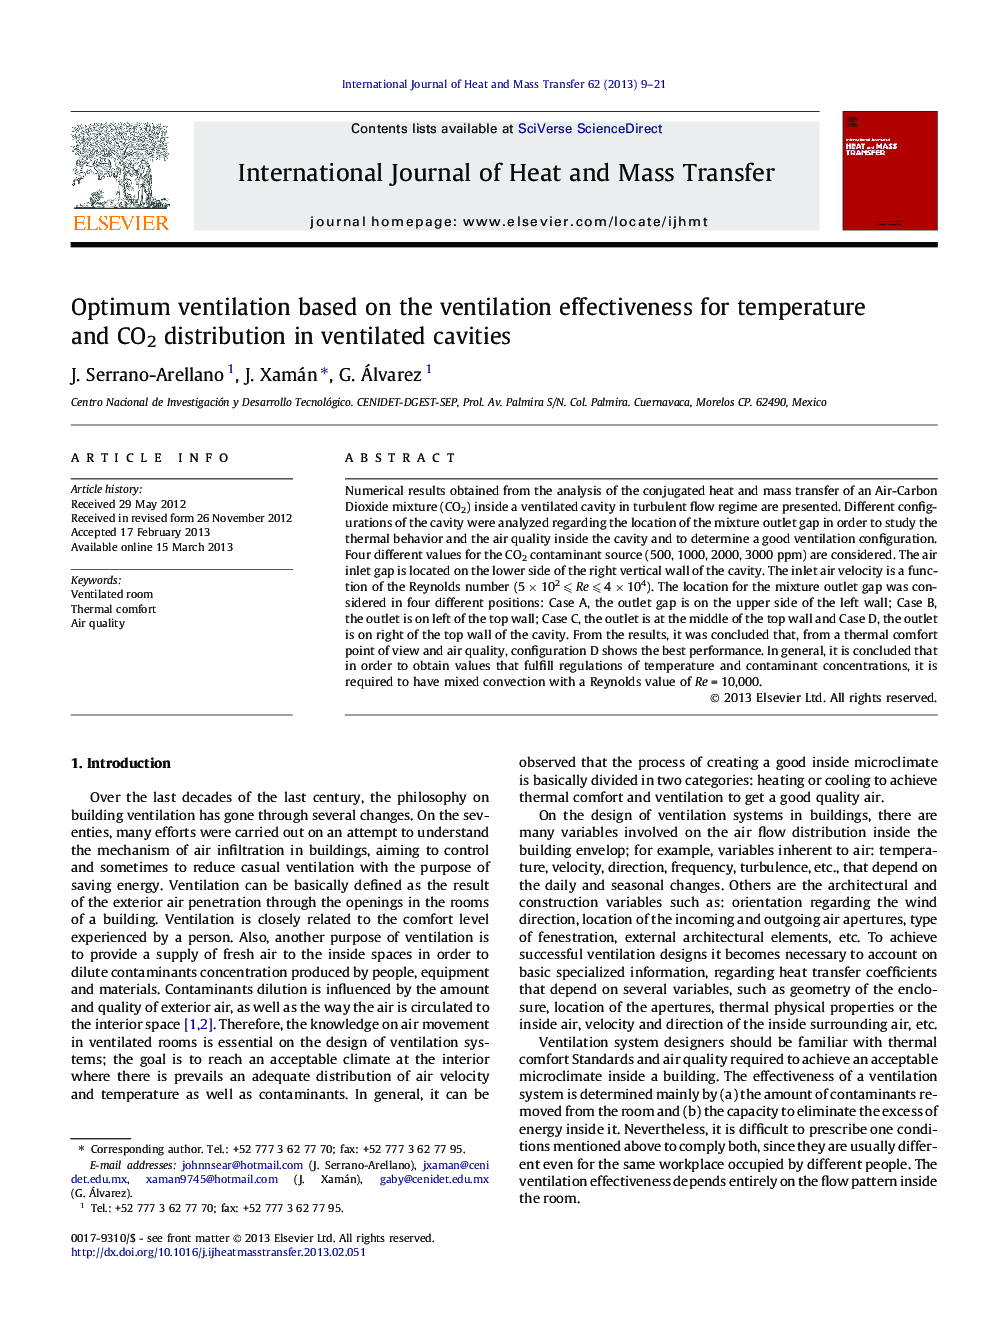 Optimum ventilation based on the ventilation effectiveness for temperature and CO2 distribution in ventilated cavities